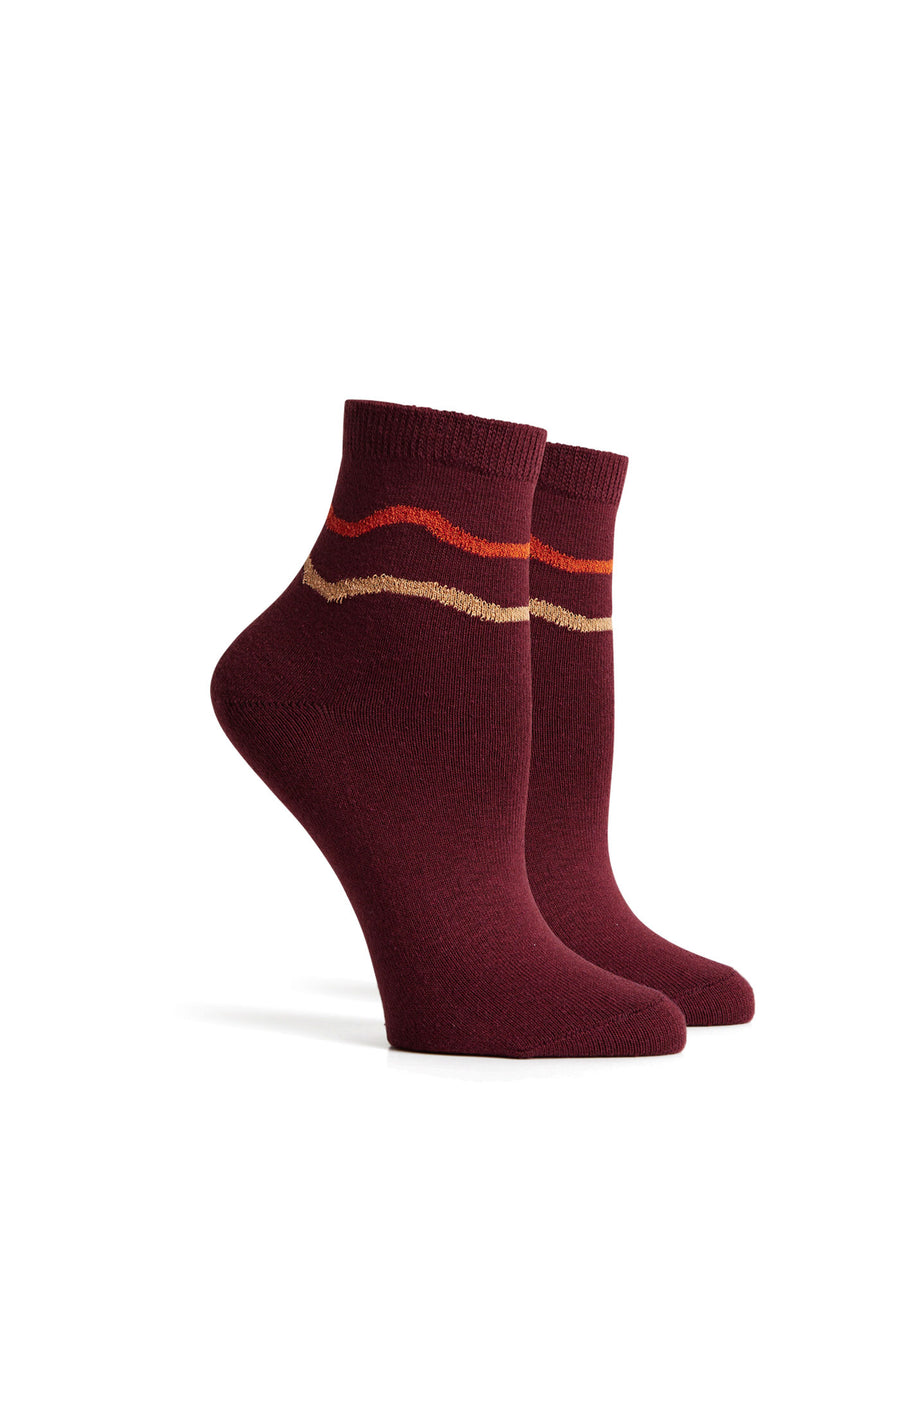 Waved and Confused Socks in Fig